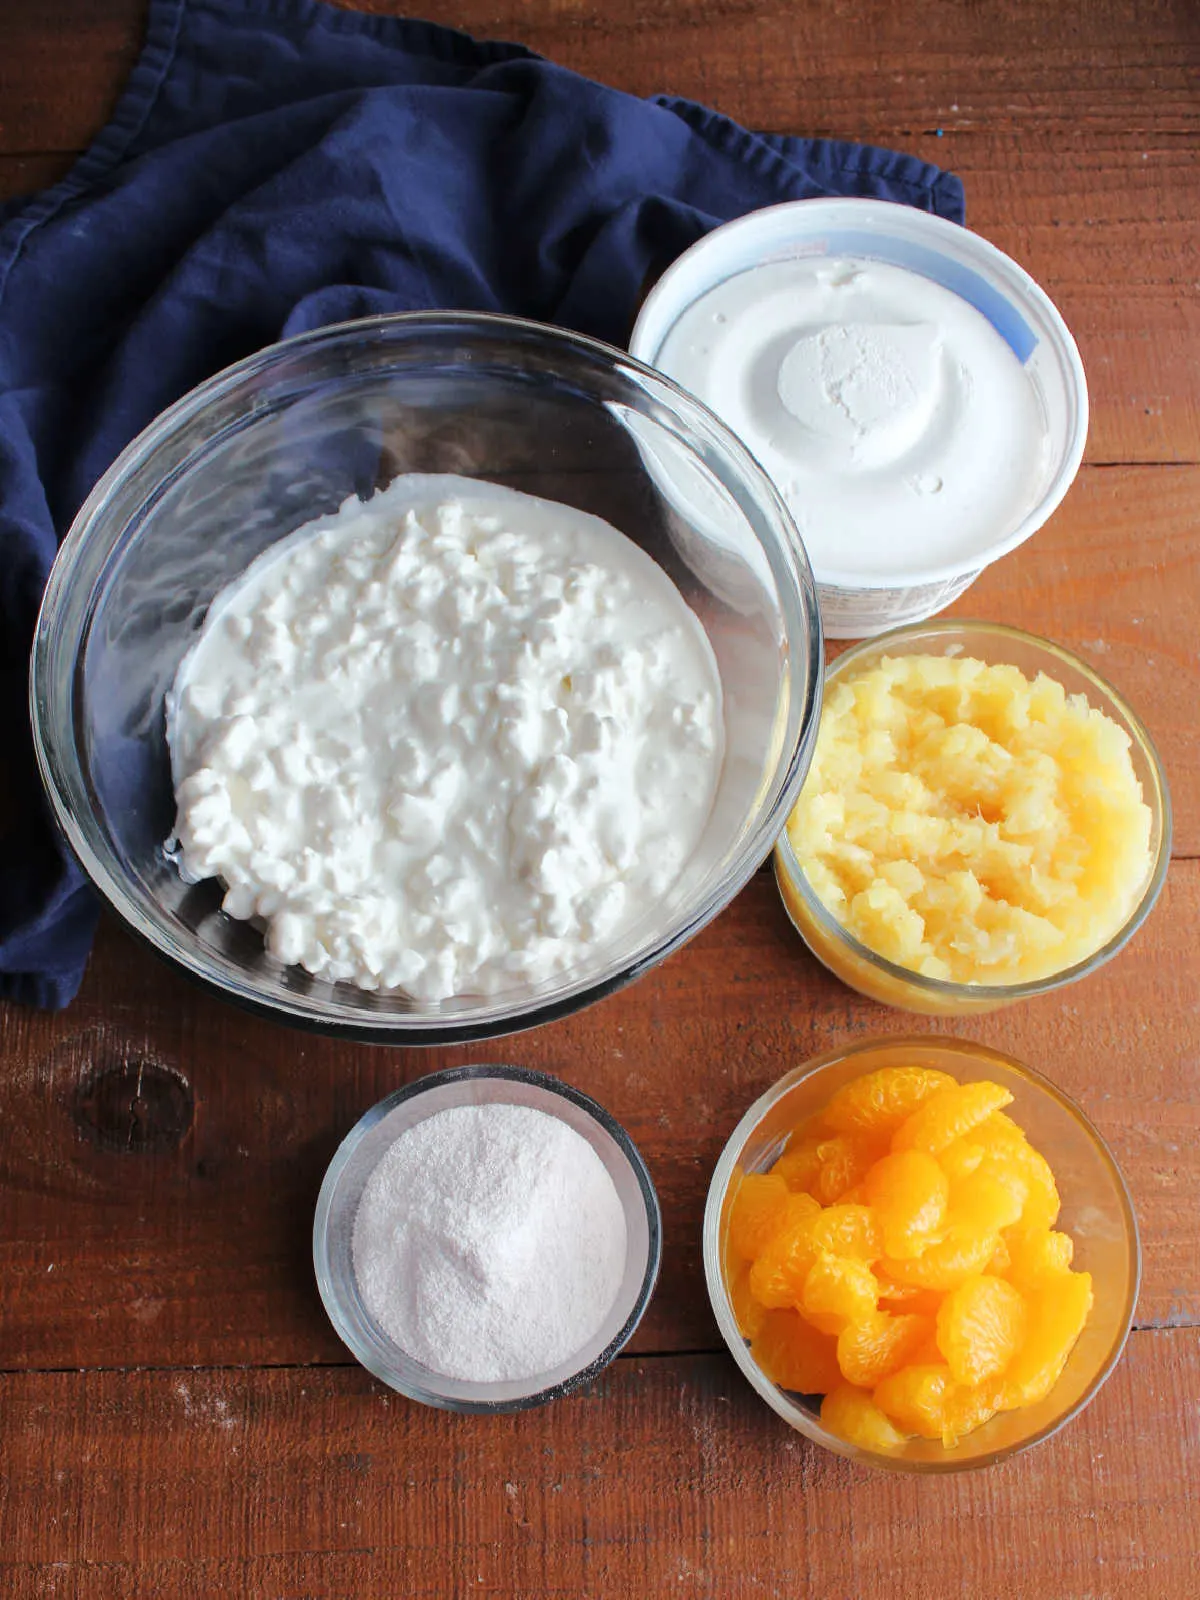 Ingredients including mandarin oranges, orange jello powder, crushed pineapple, cottage cheese, and whipped topping ready to be made into jello salad.